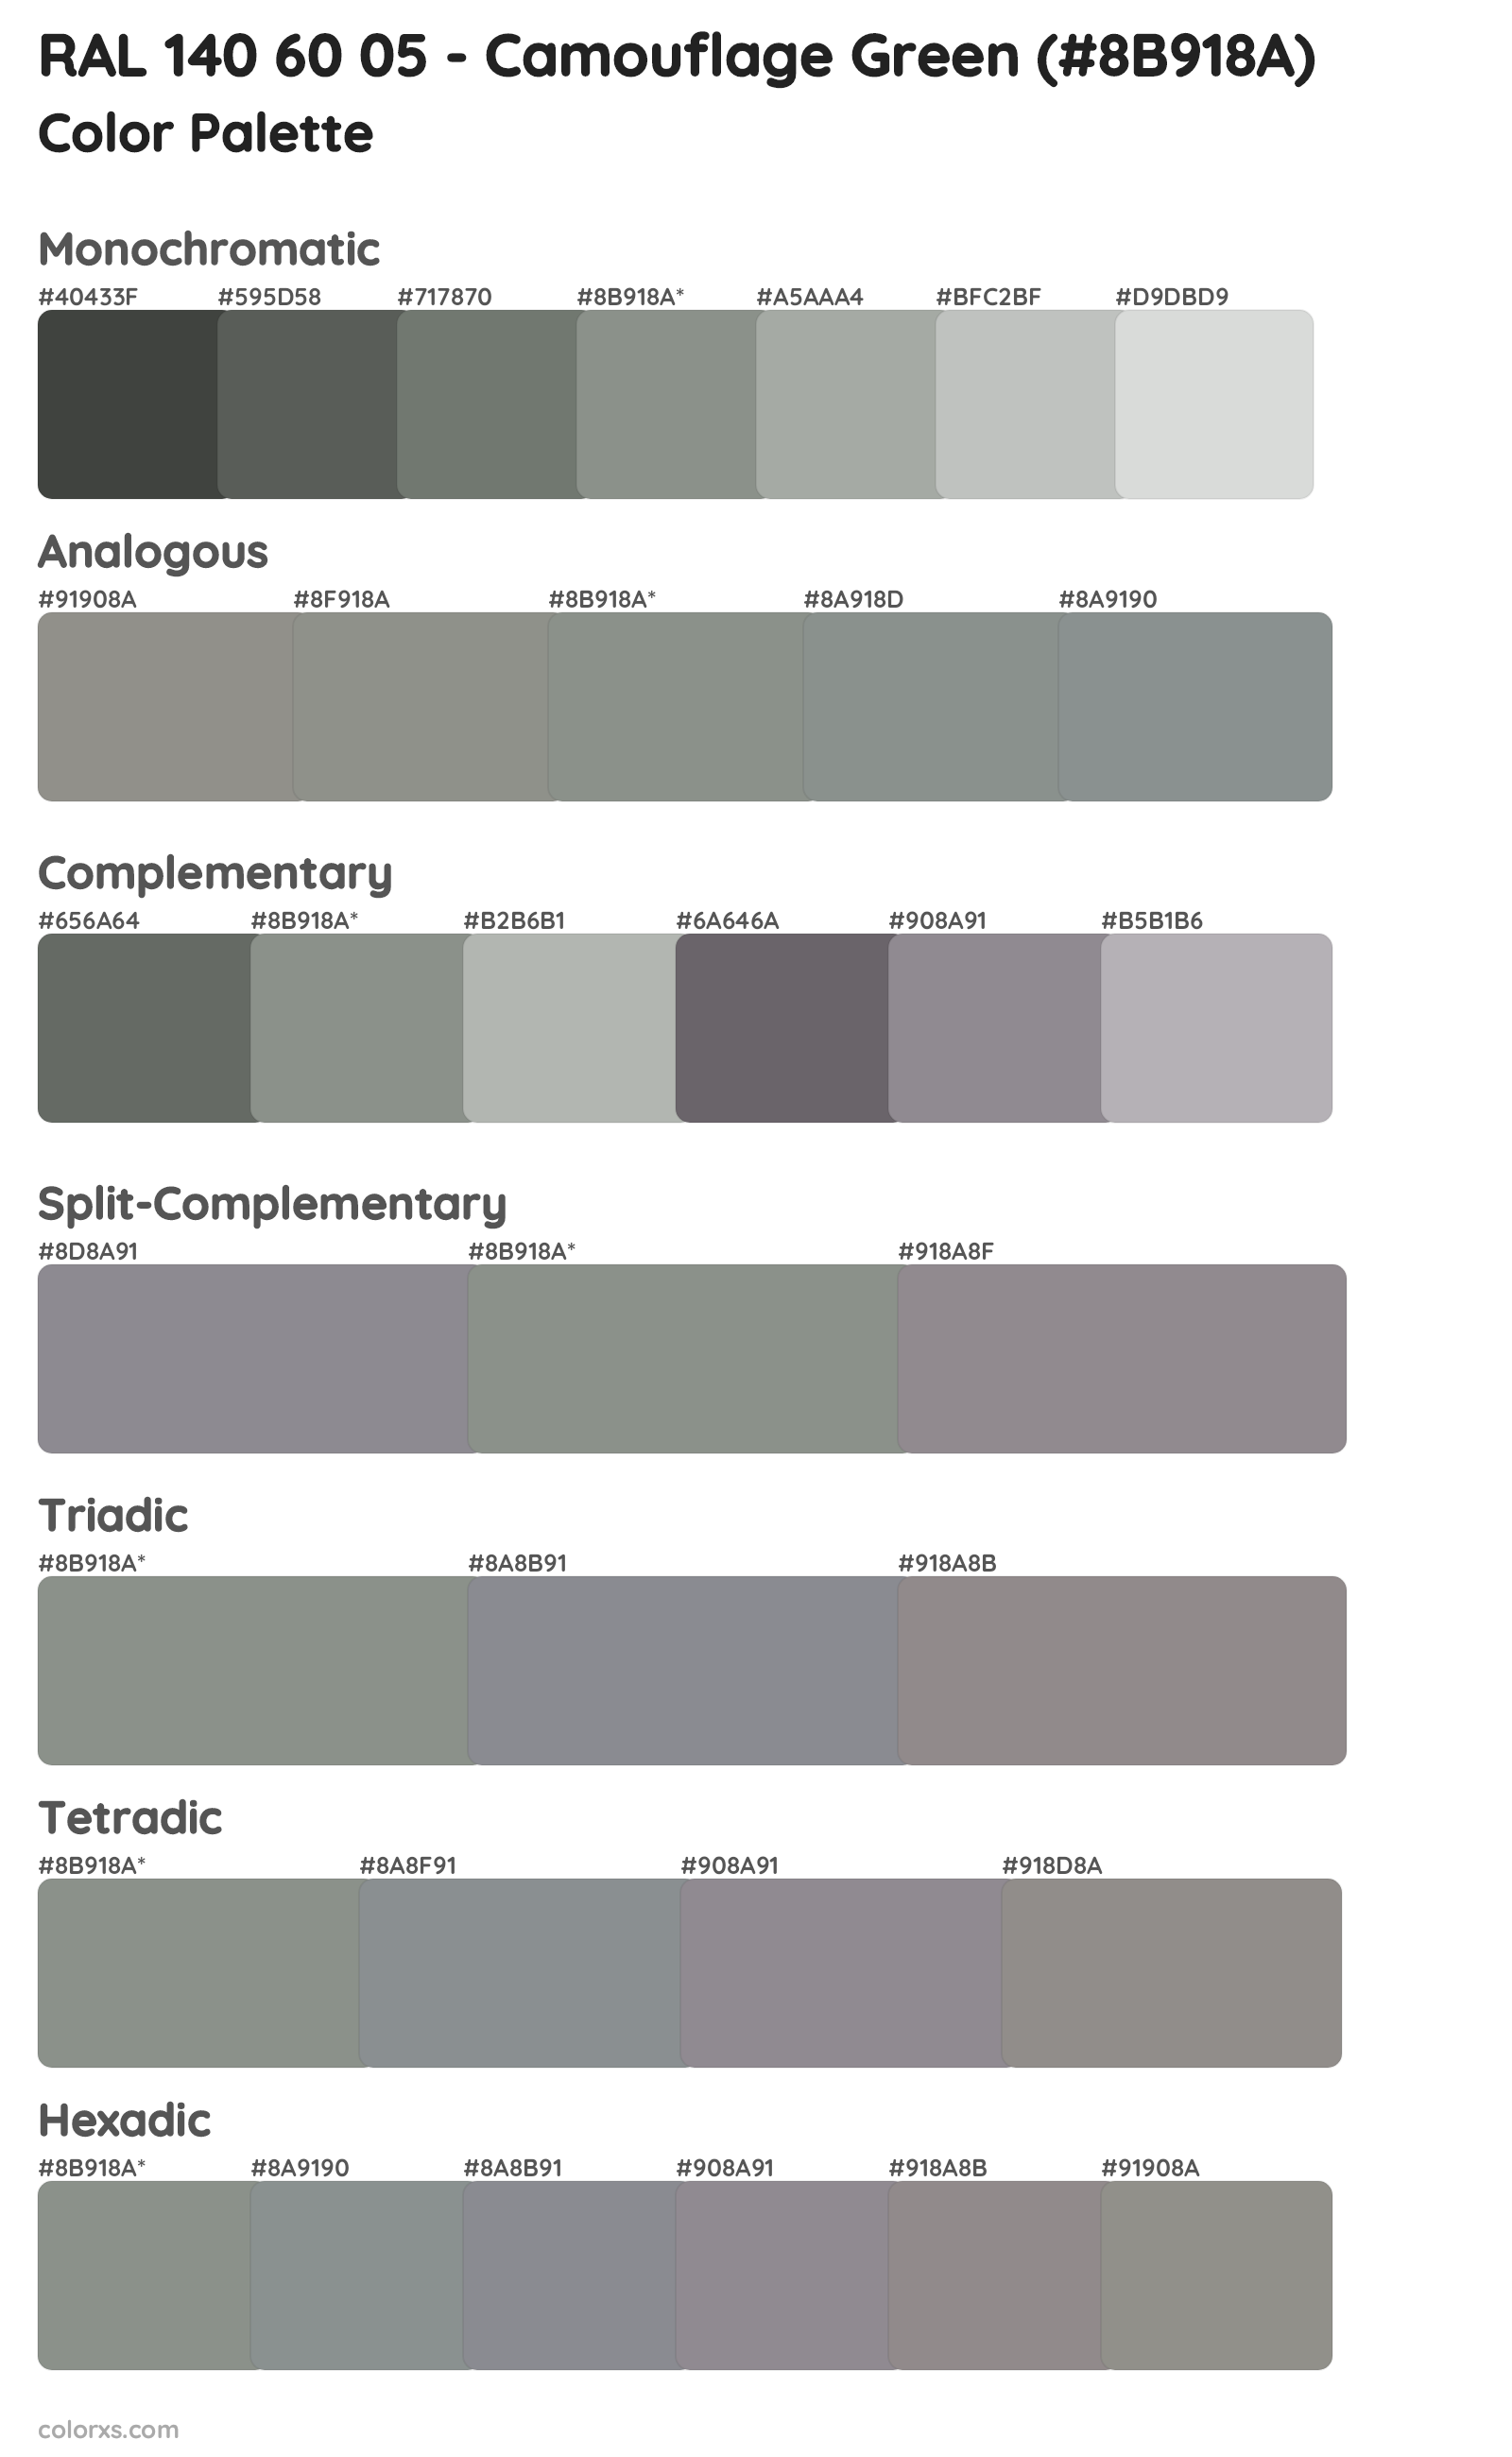 RAL 140 60 05 - Camouflage Green Color Scheme Palettes